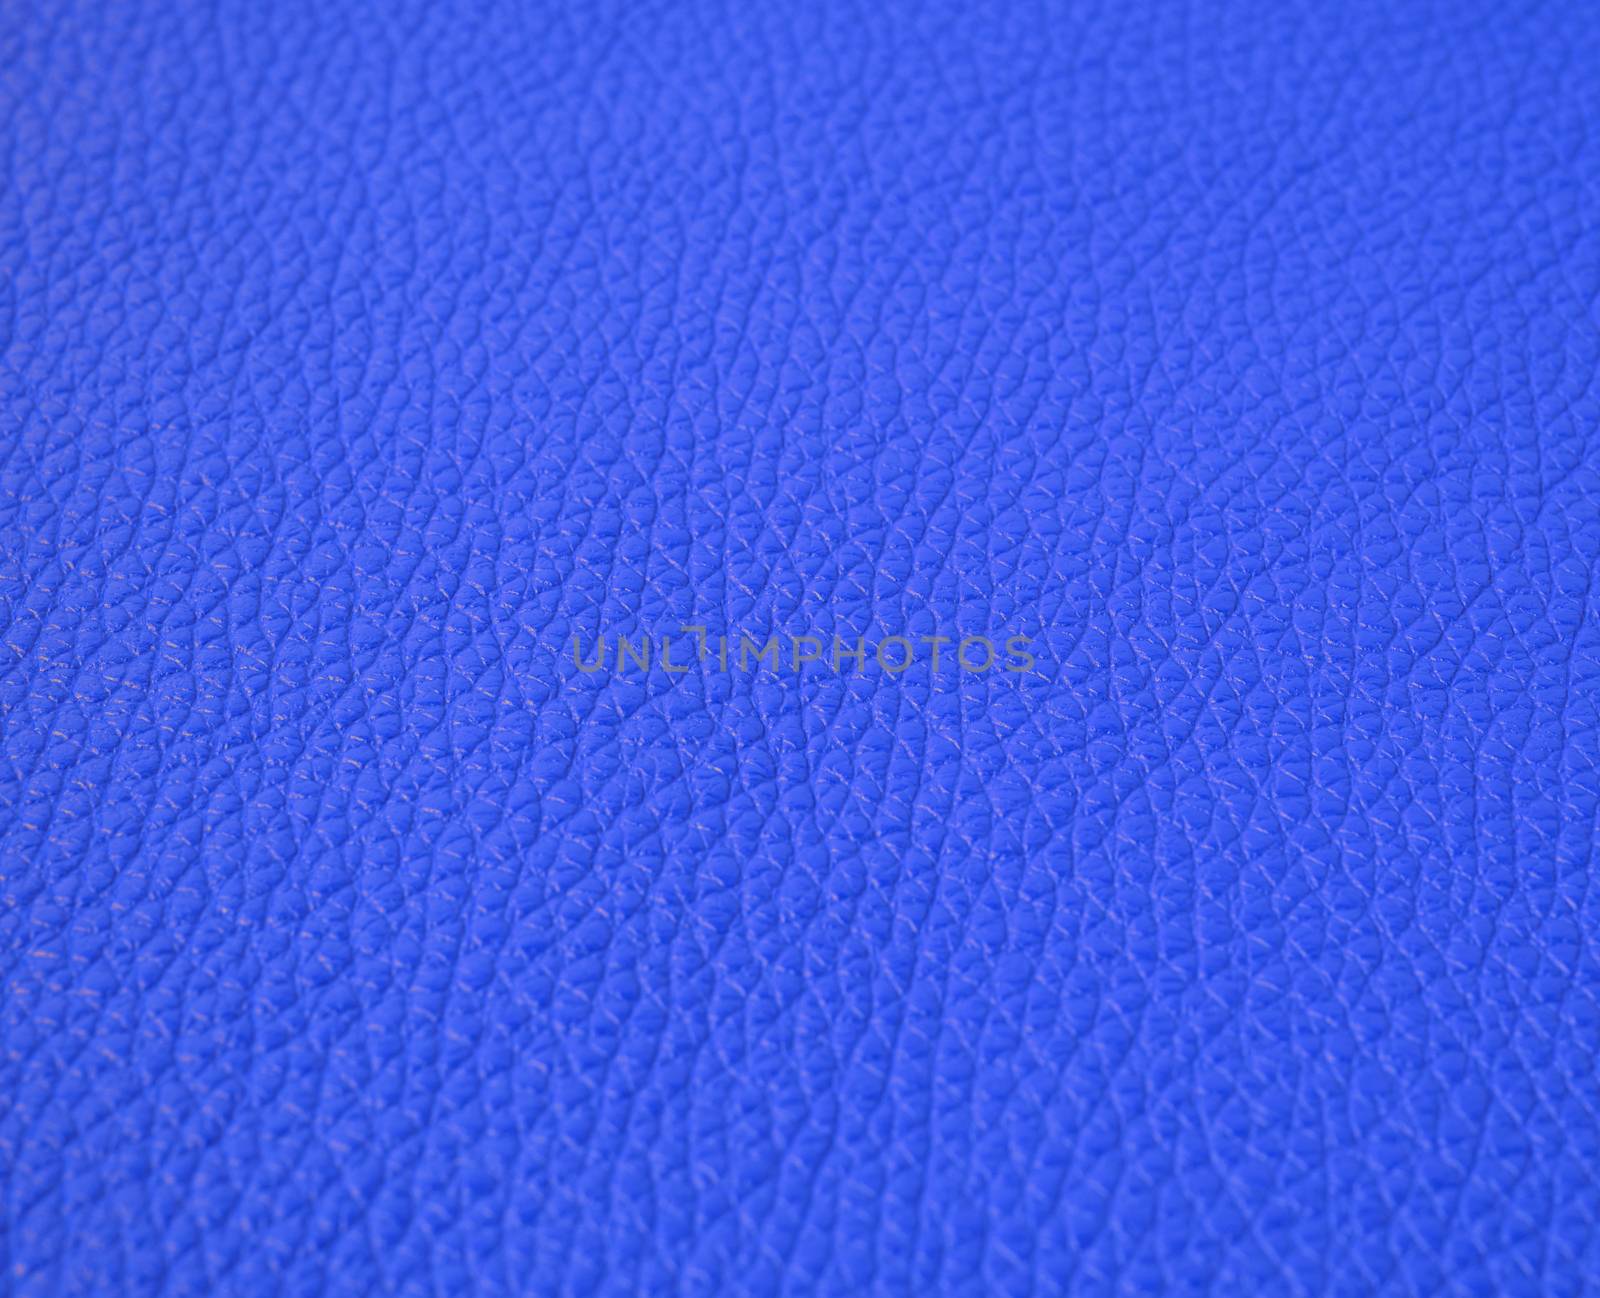 texture of dark blue cow leather, full frame, material for sewing bags, shoes, selective focus 